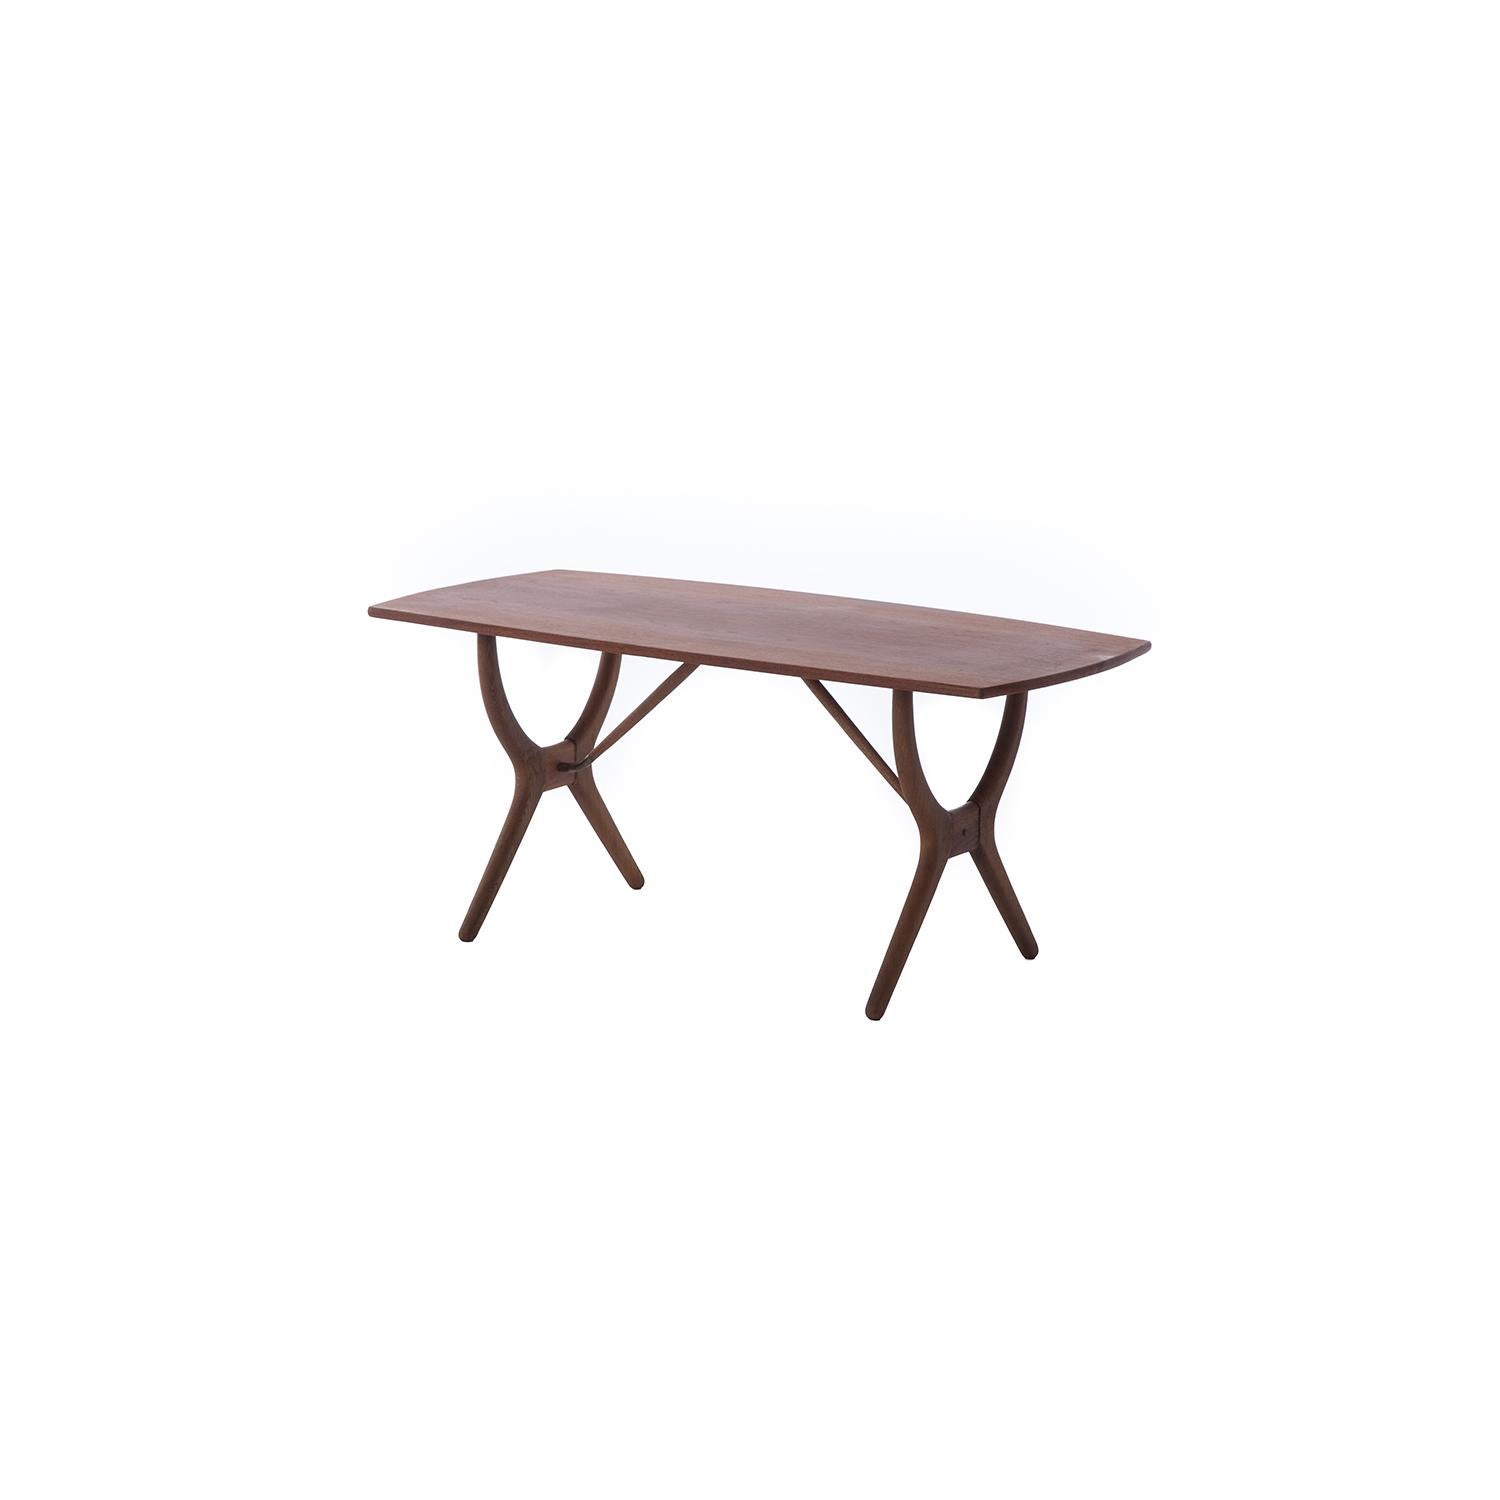 This Scandinavian modern teak coffee table has softly bowed edge details on the sides of the top and a complex wishbone shaped base with brass details. Made from old growth teak with an oil finish, this table has a beautiful patina. There is a light